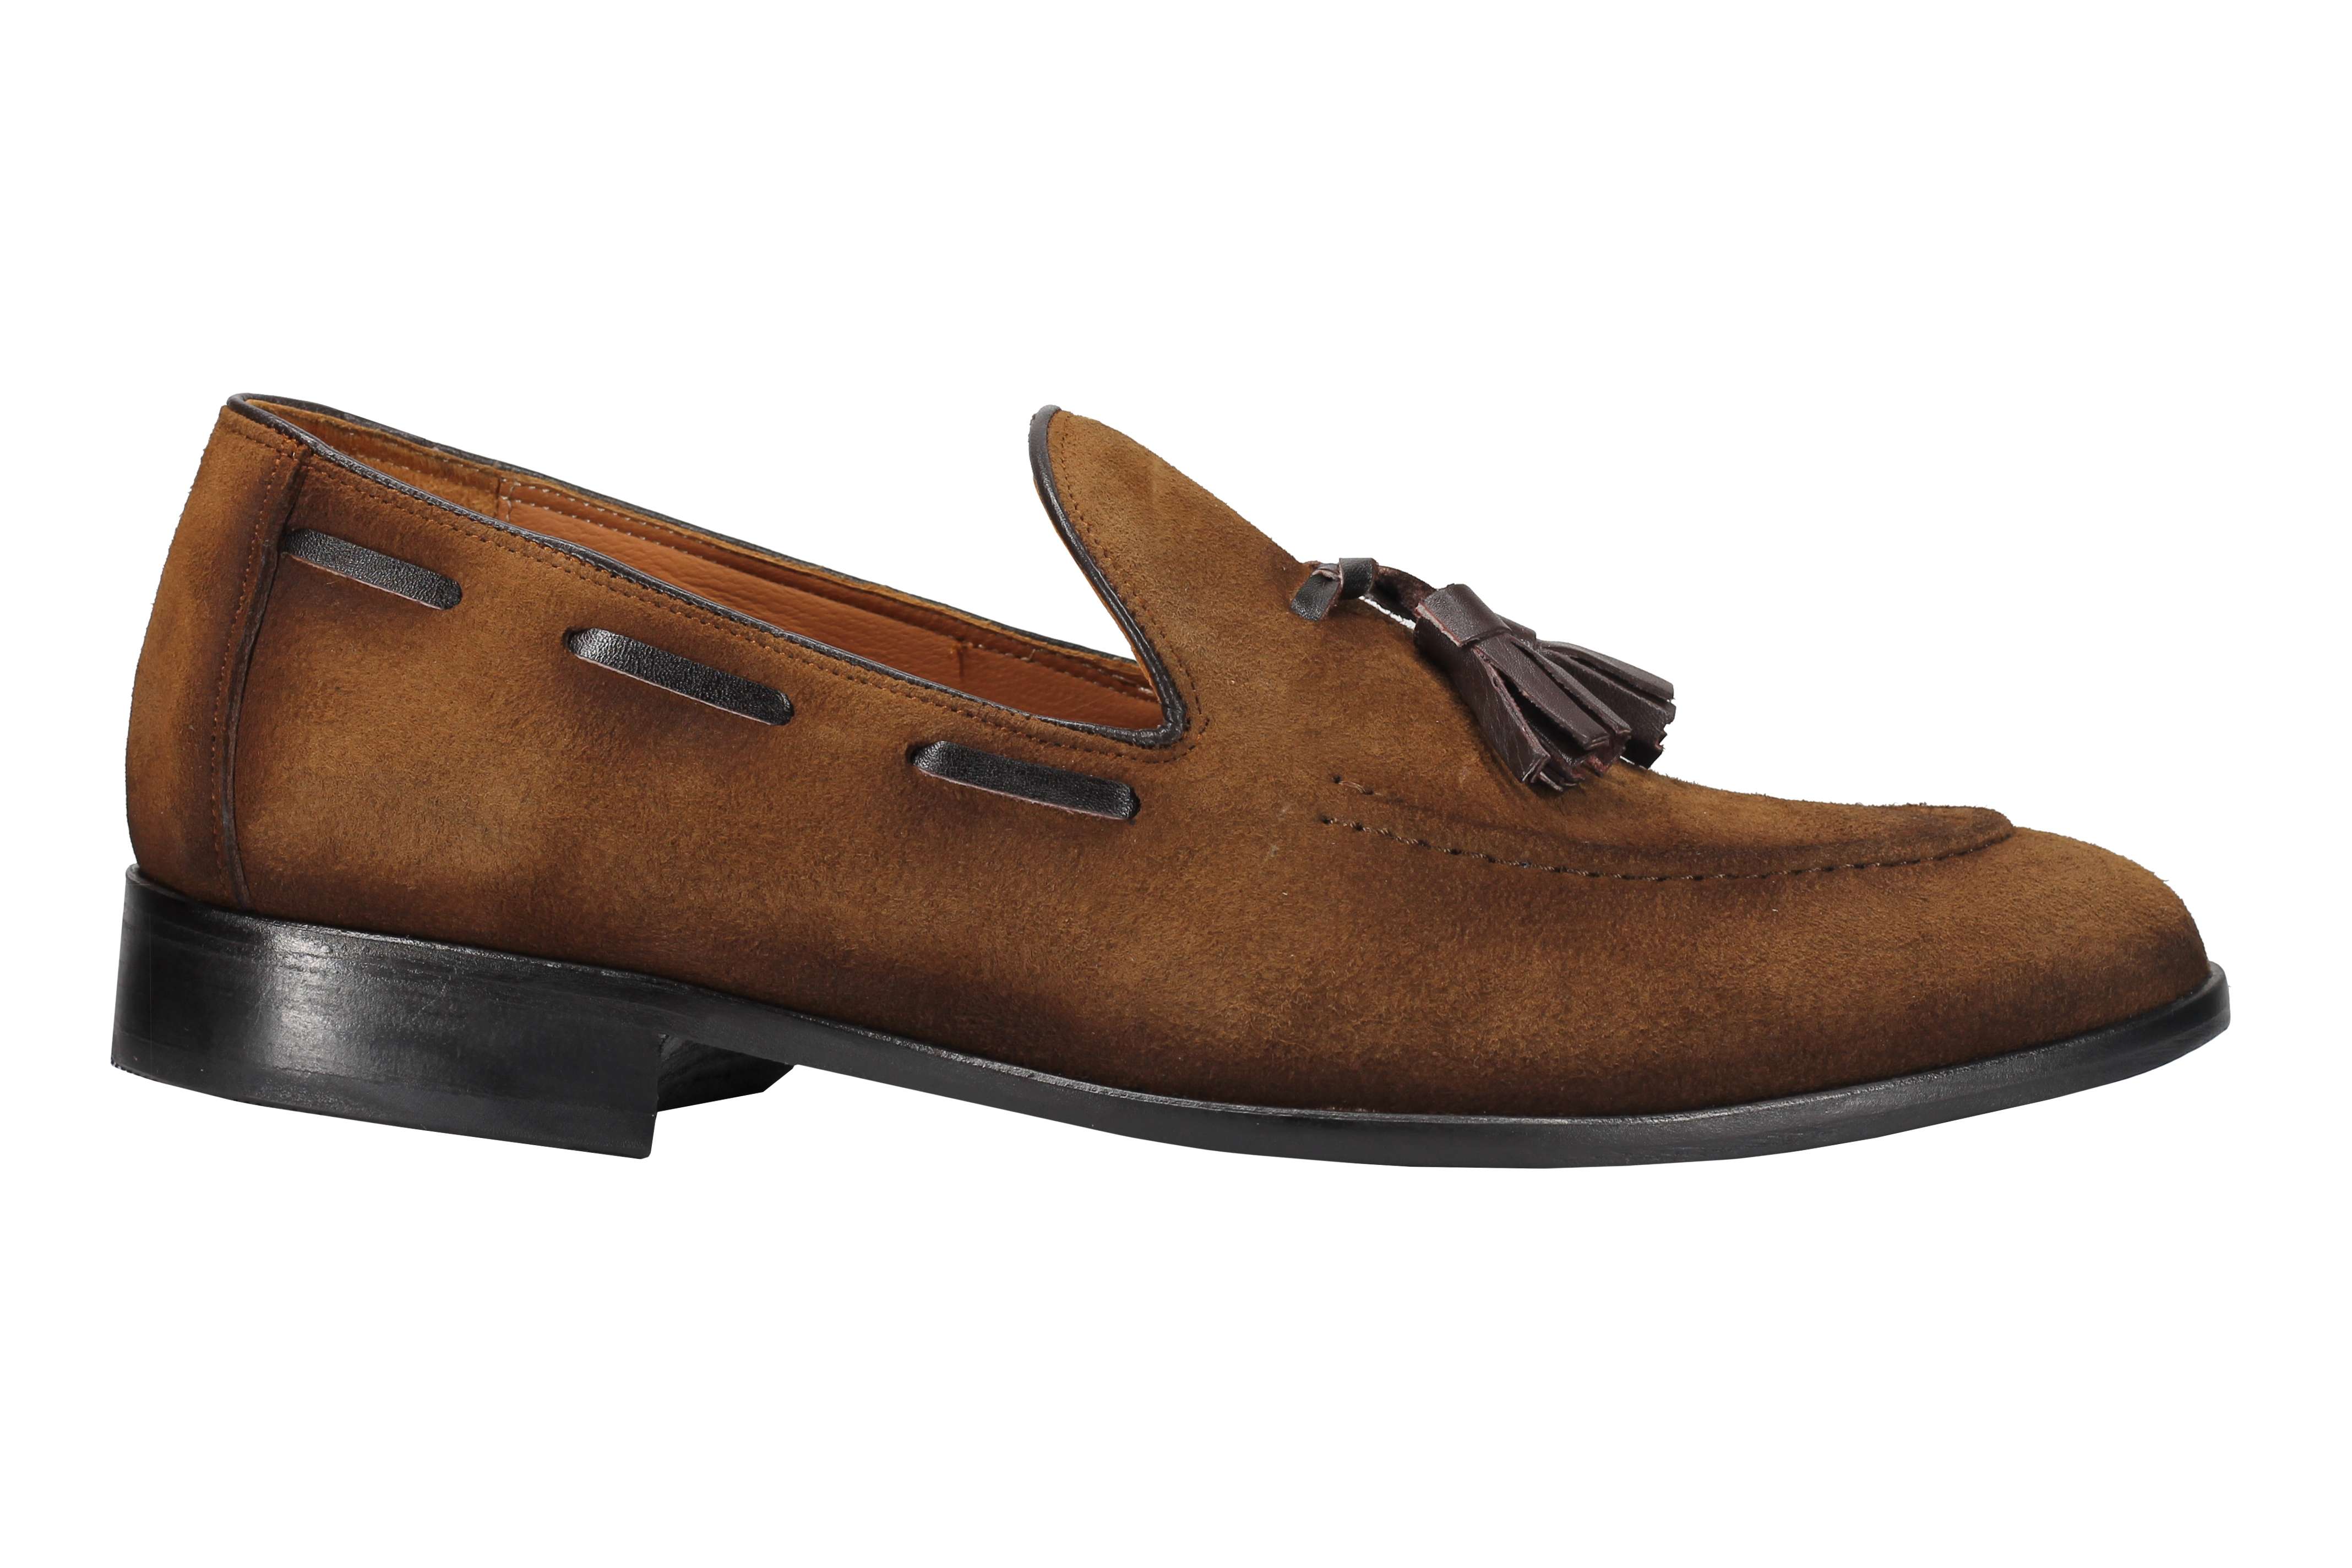 SUDED LEATHER TASSEL LOAFERS IN TAN